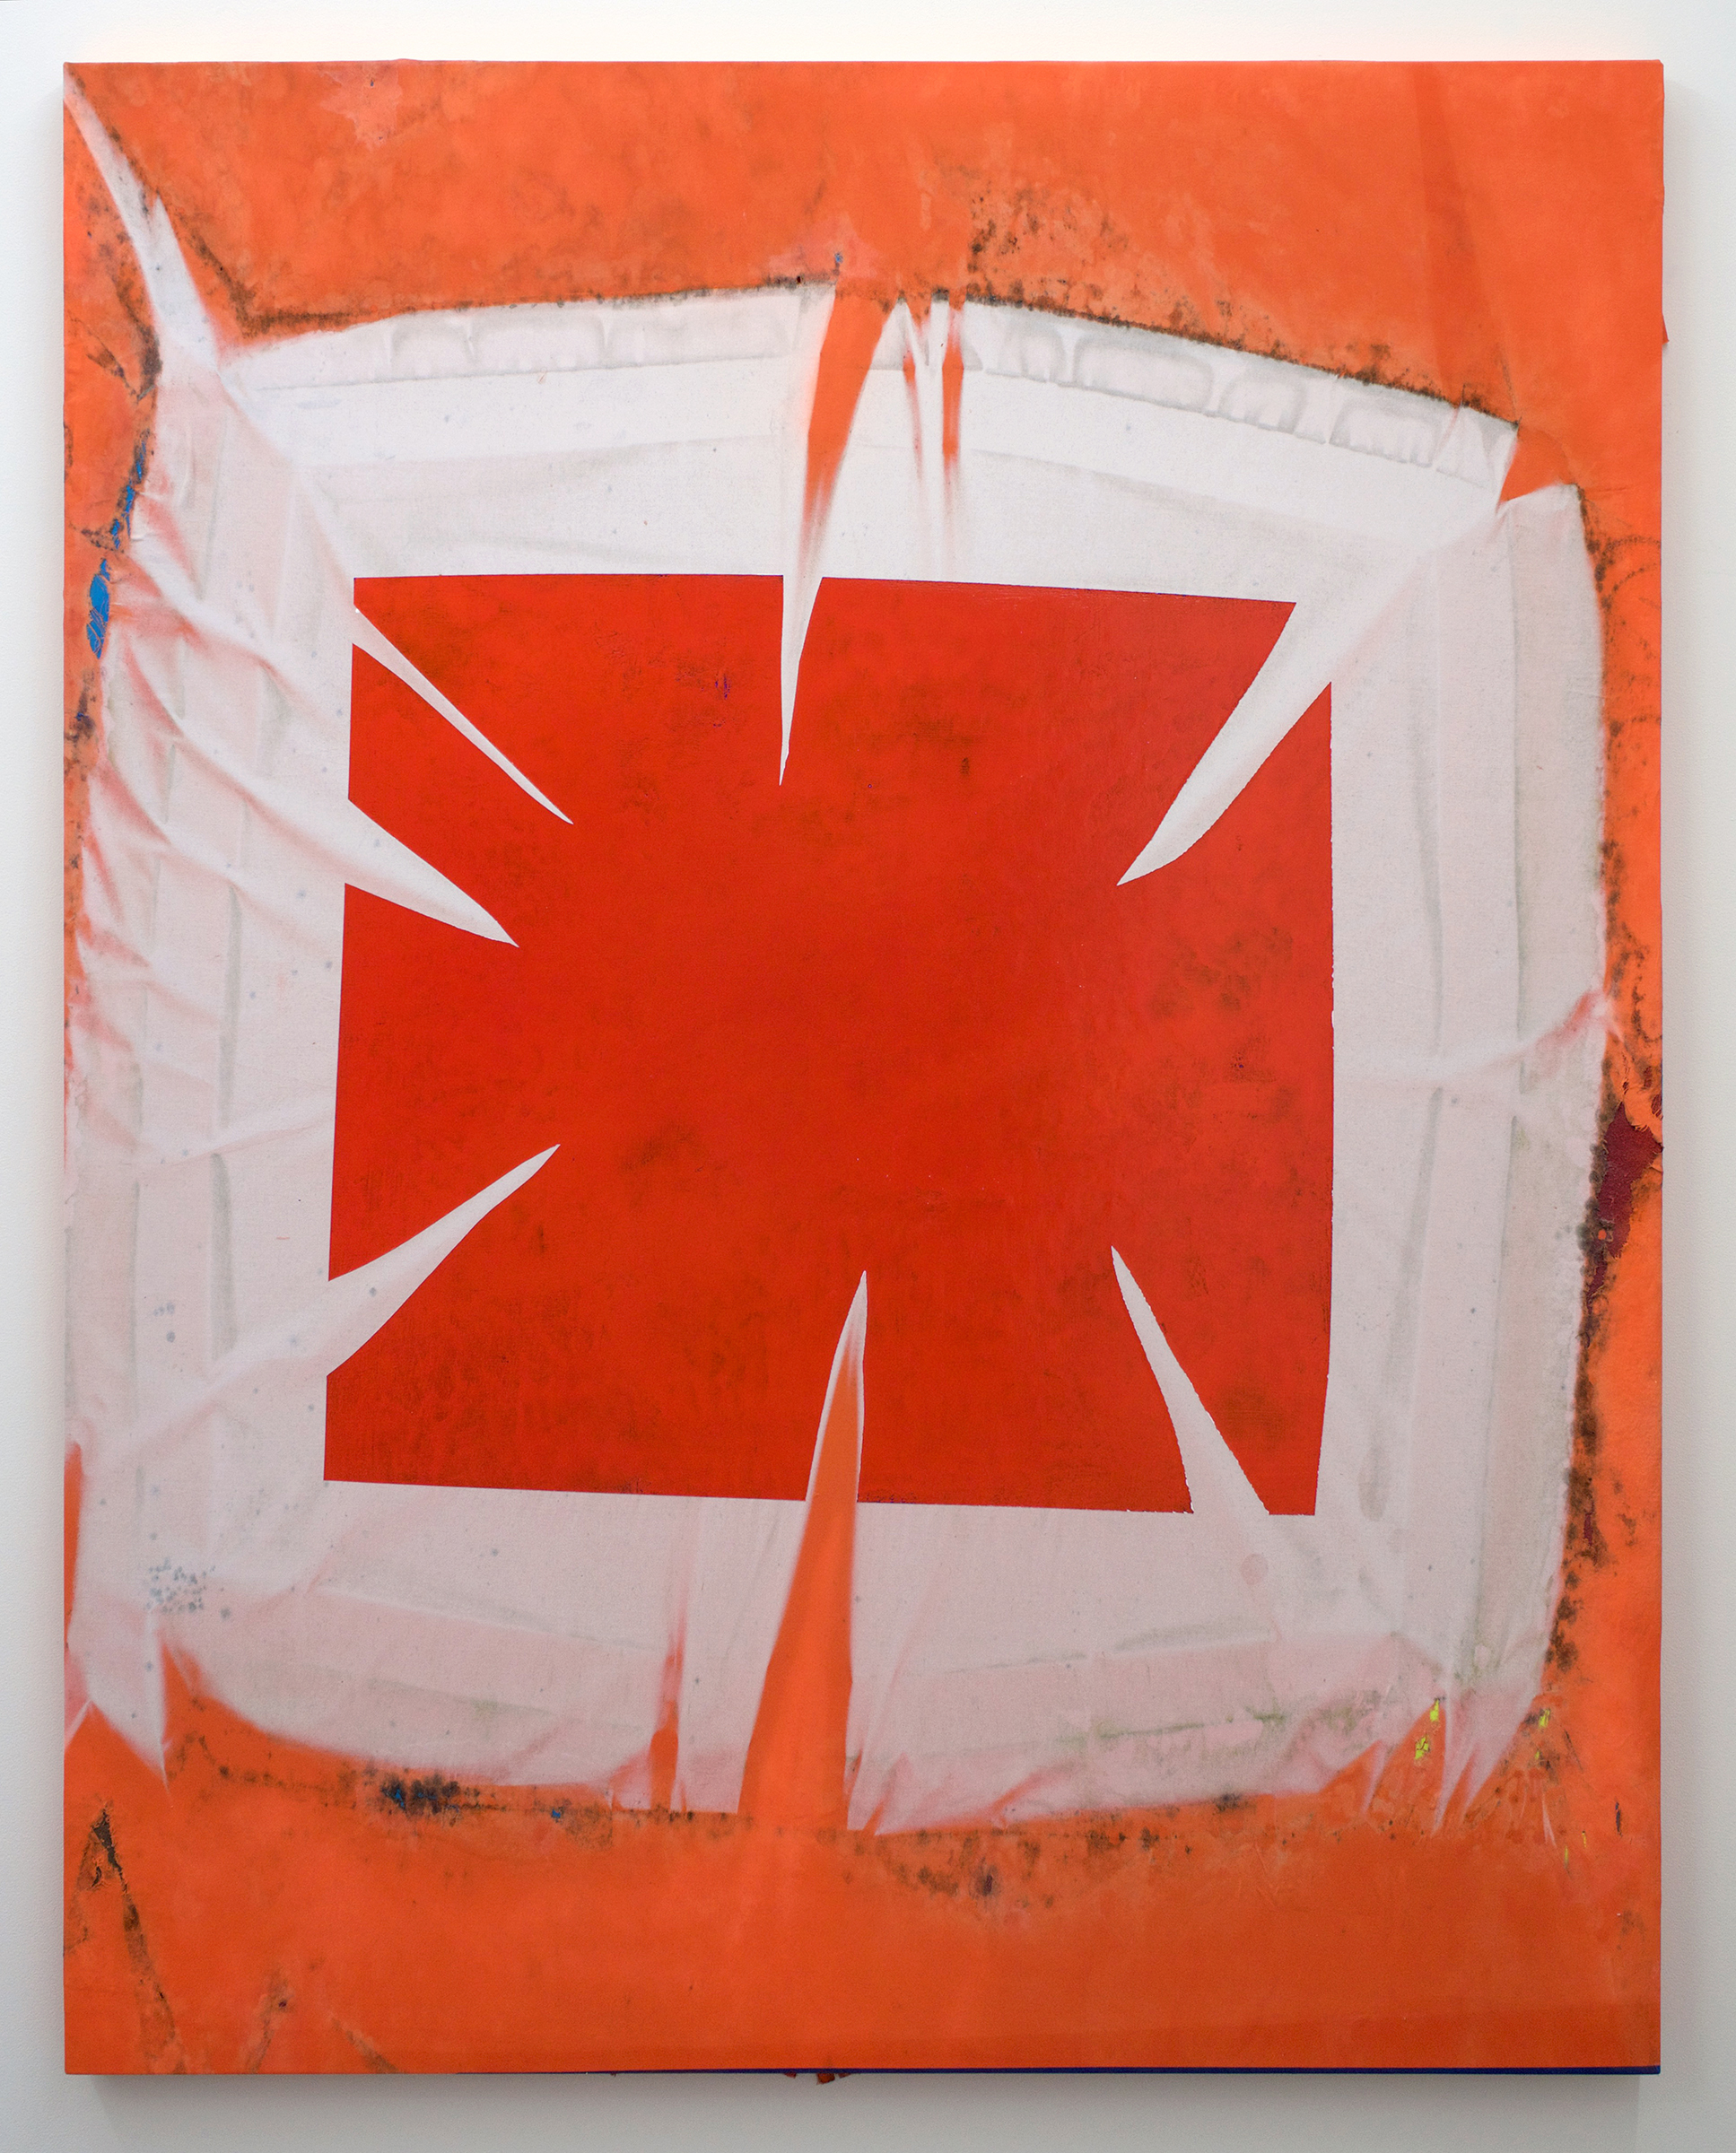   CHRIS DUNCAN   Red On Orange (Fall 2016 – Spring 2017) six-month exposure/Oakland, &nbsp;2017 ,&nbsp; sun, time and acrylic on fabric, 60" x 48" 